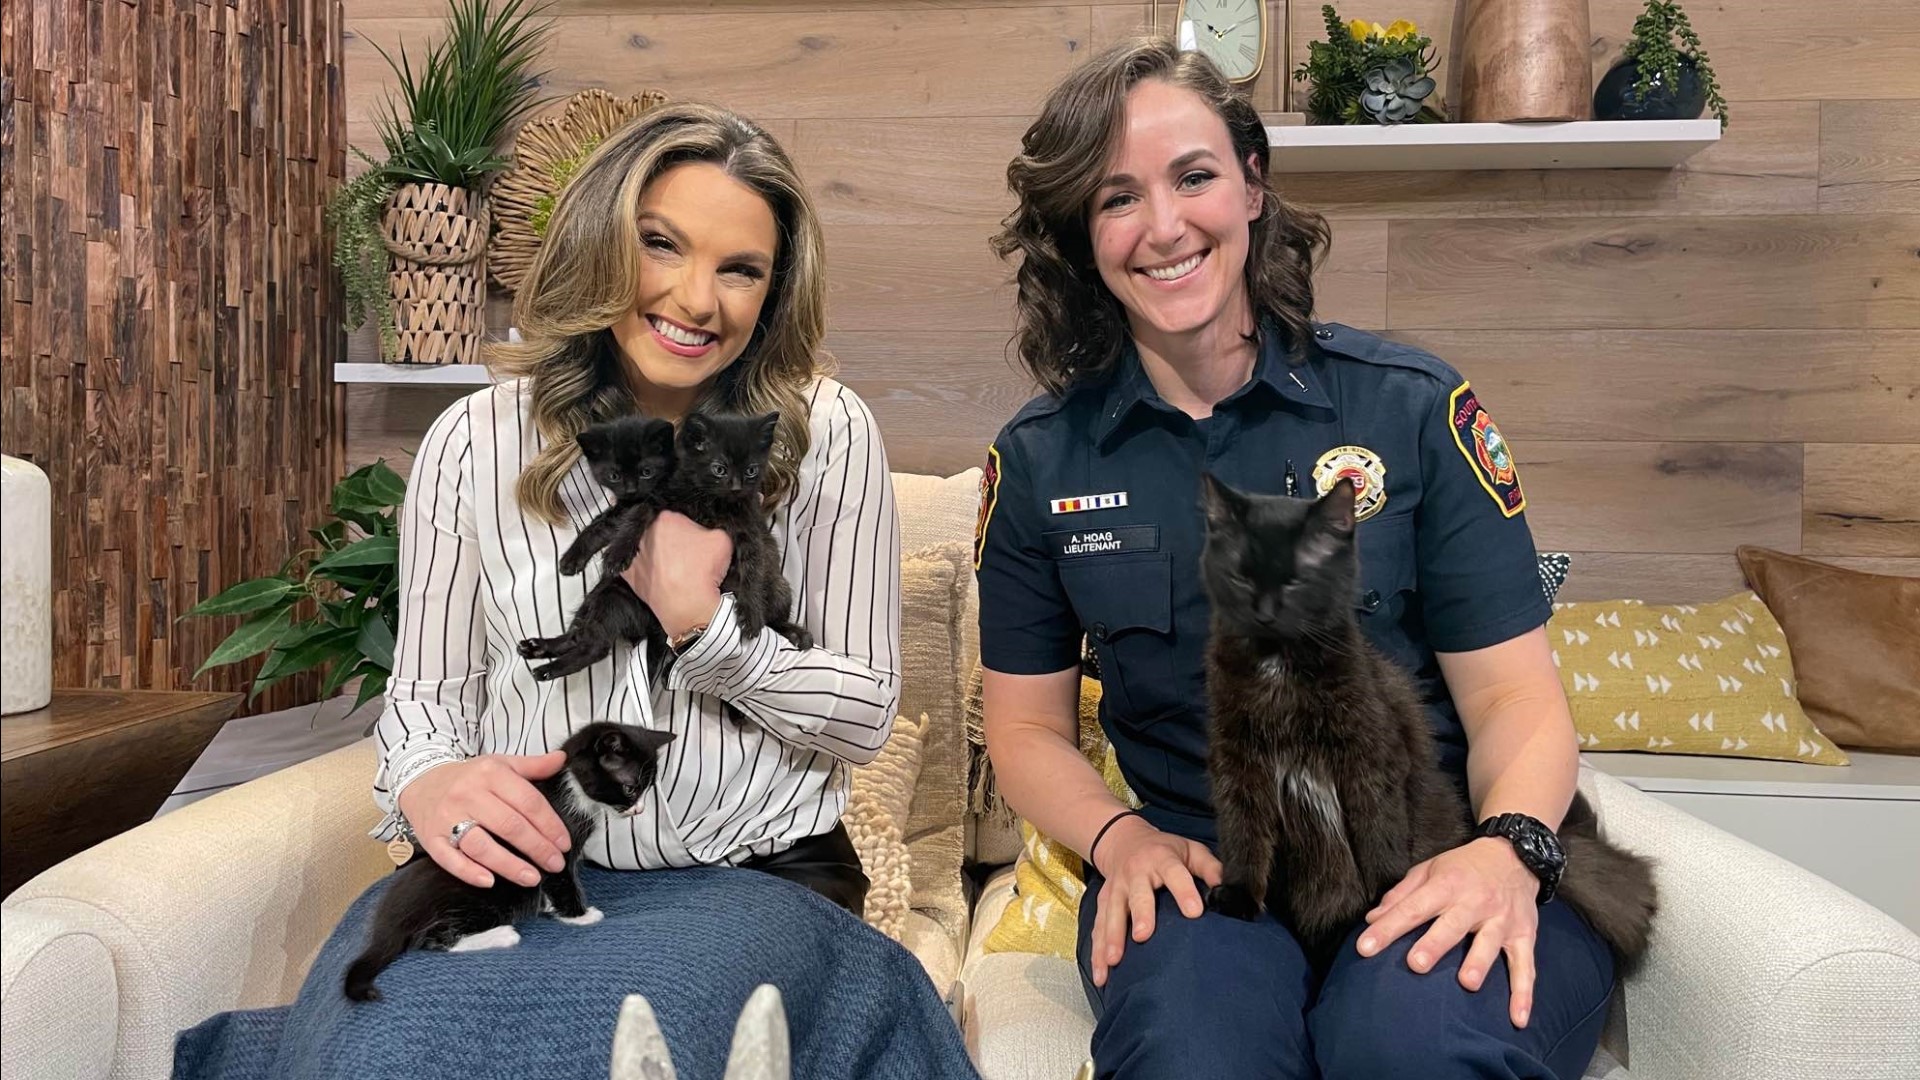 South King Fire and Rescue found themselves in charge of newborn kittens after they were left at Station 65. #newdaynw